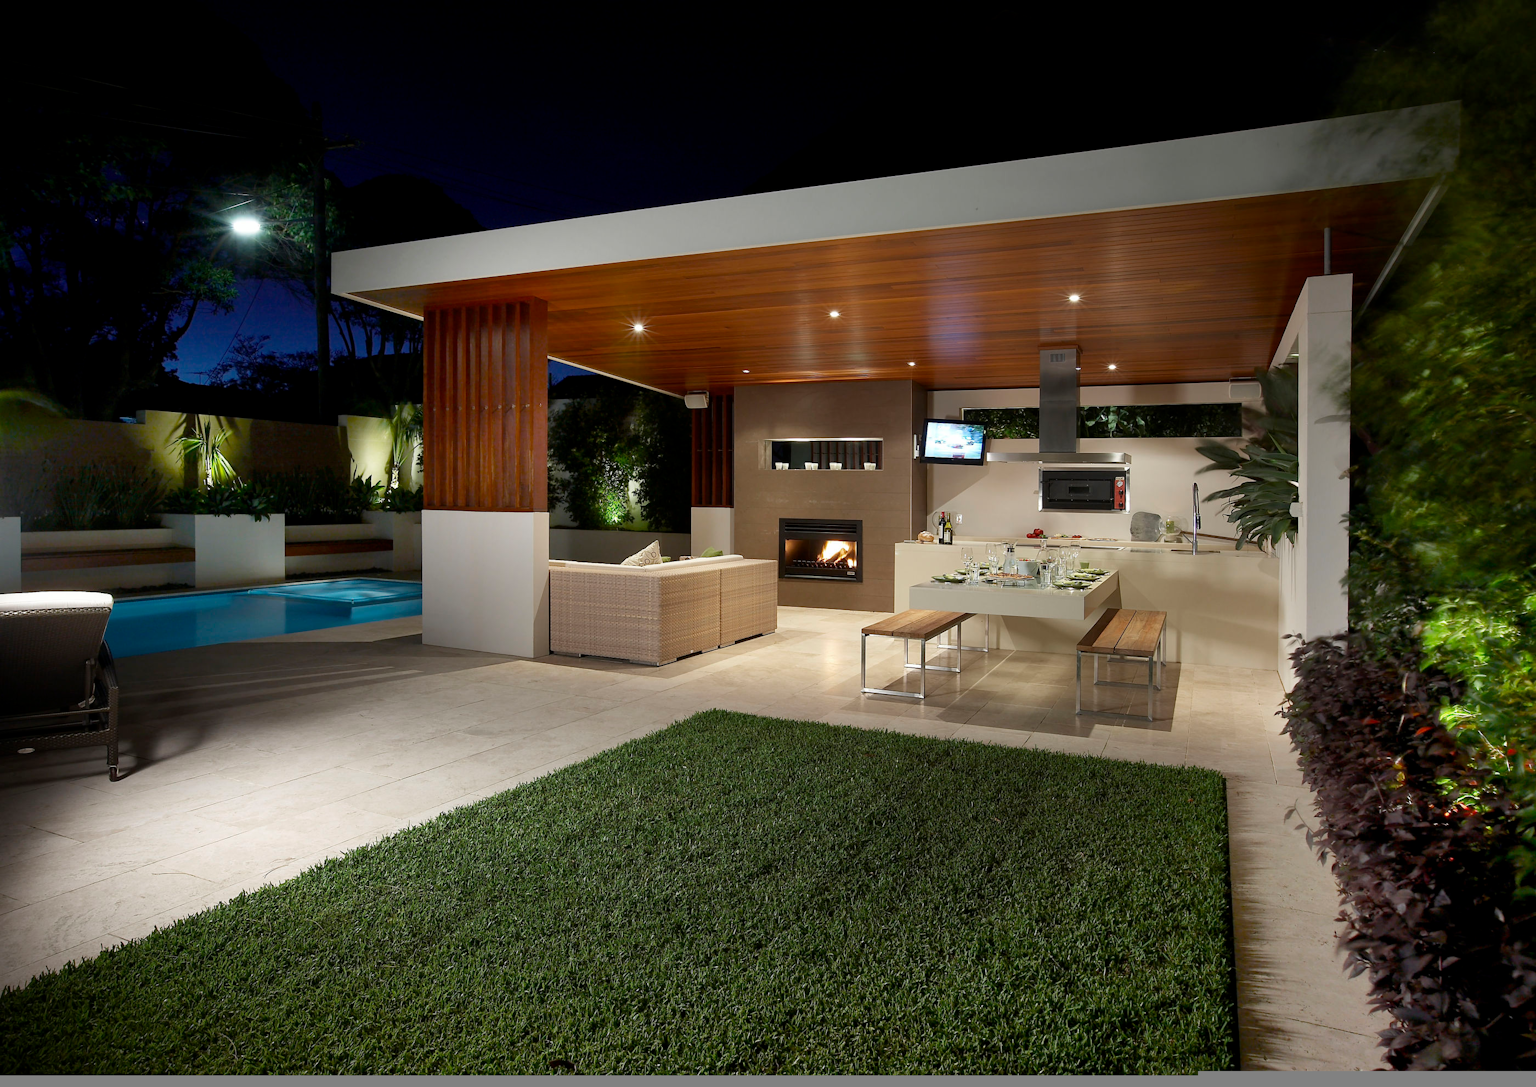 Outdoor entertainment area with large format Scala travertine pavers